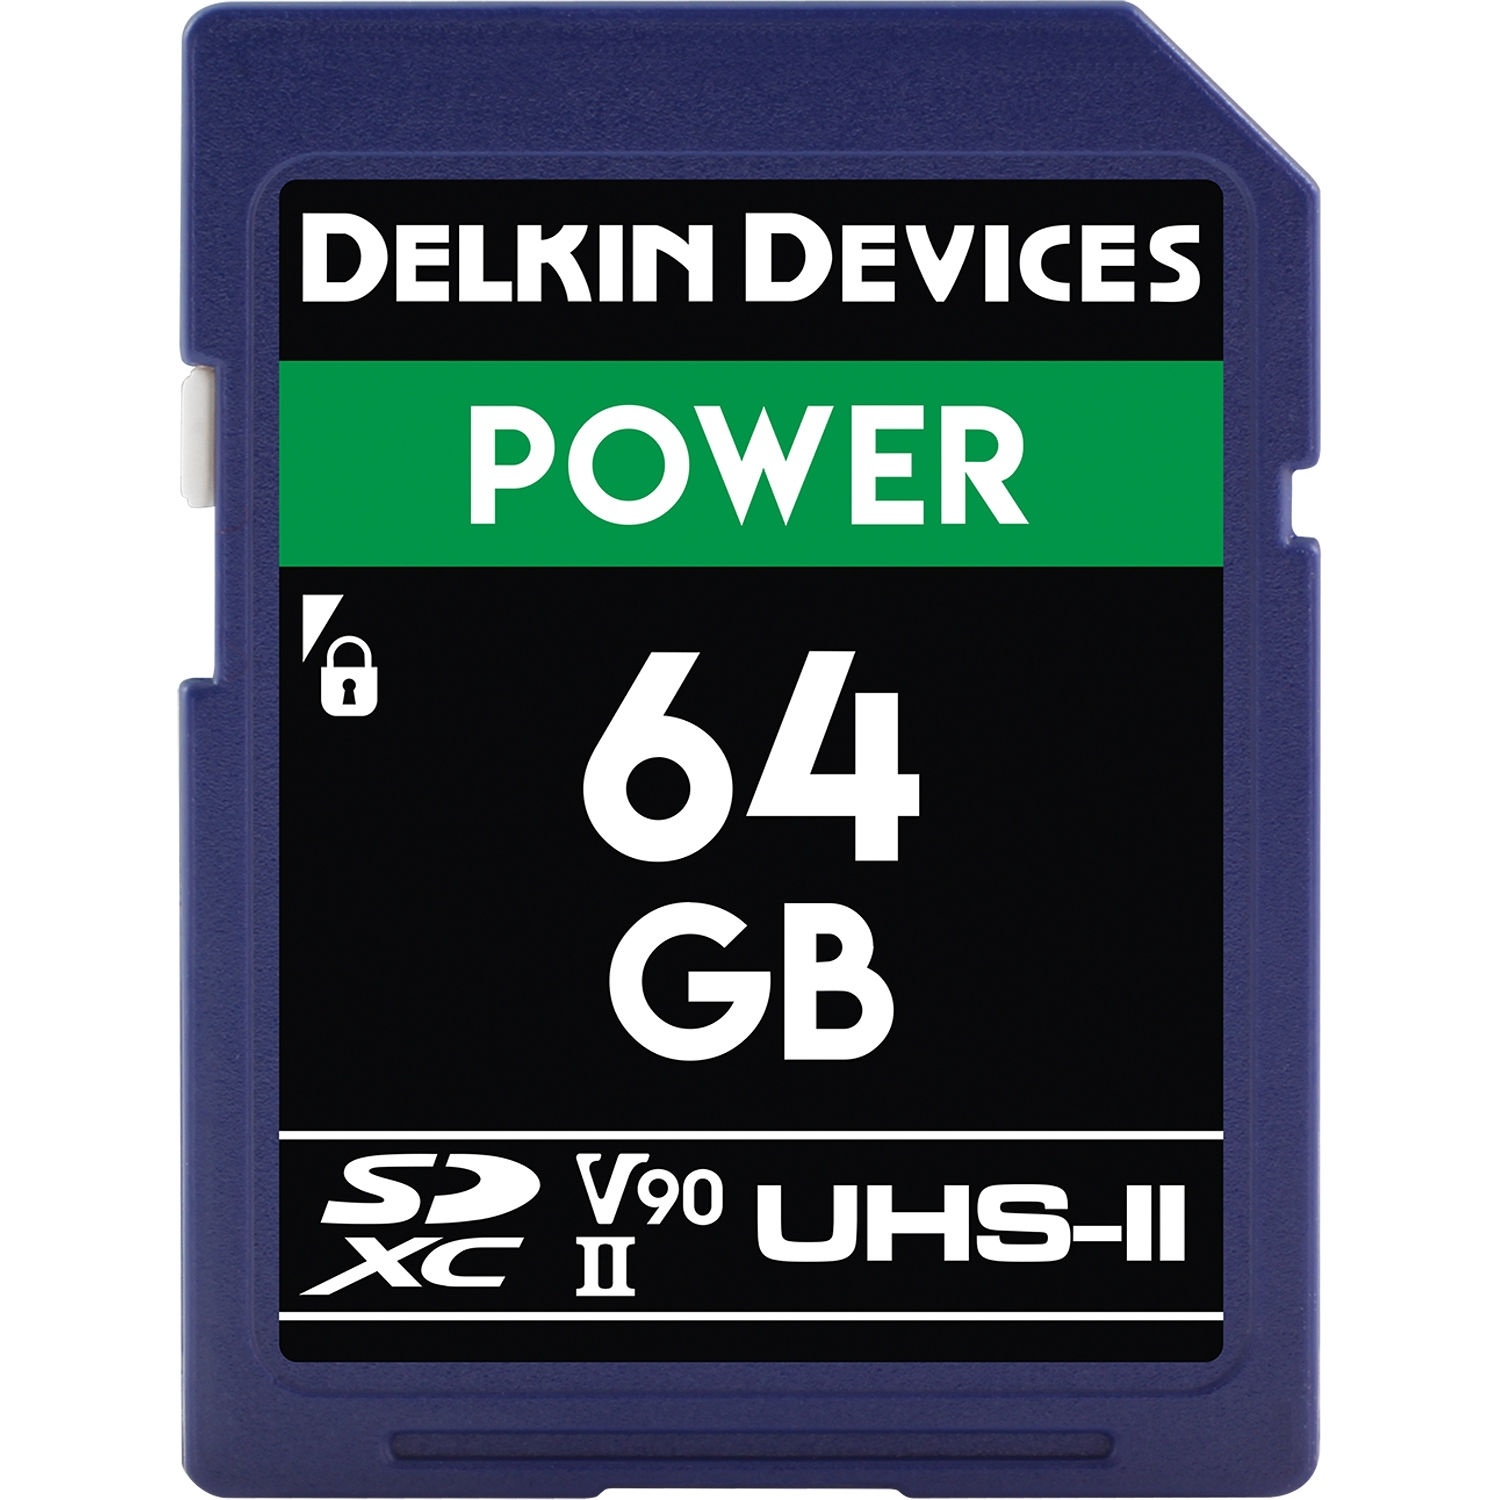 Delkin Devices DDSDG200064G 64GB POWER UHS-II SDXC Memory Card